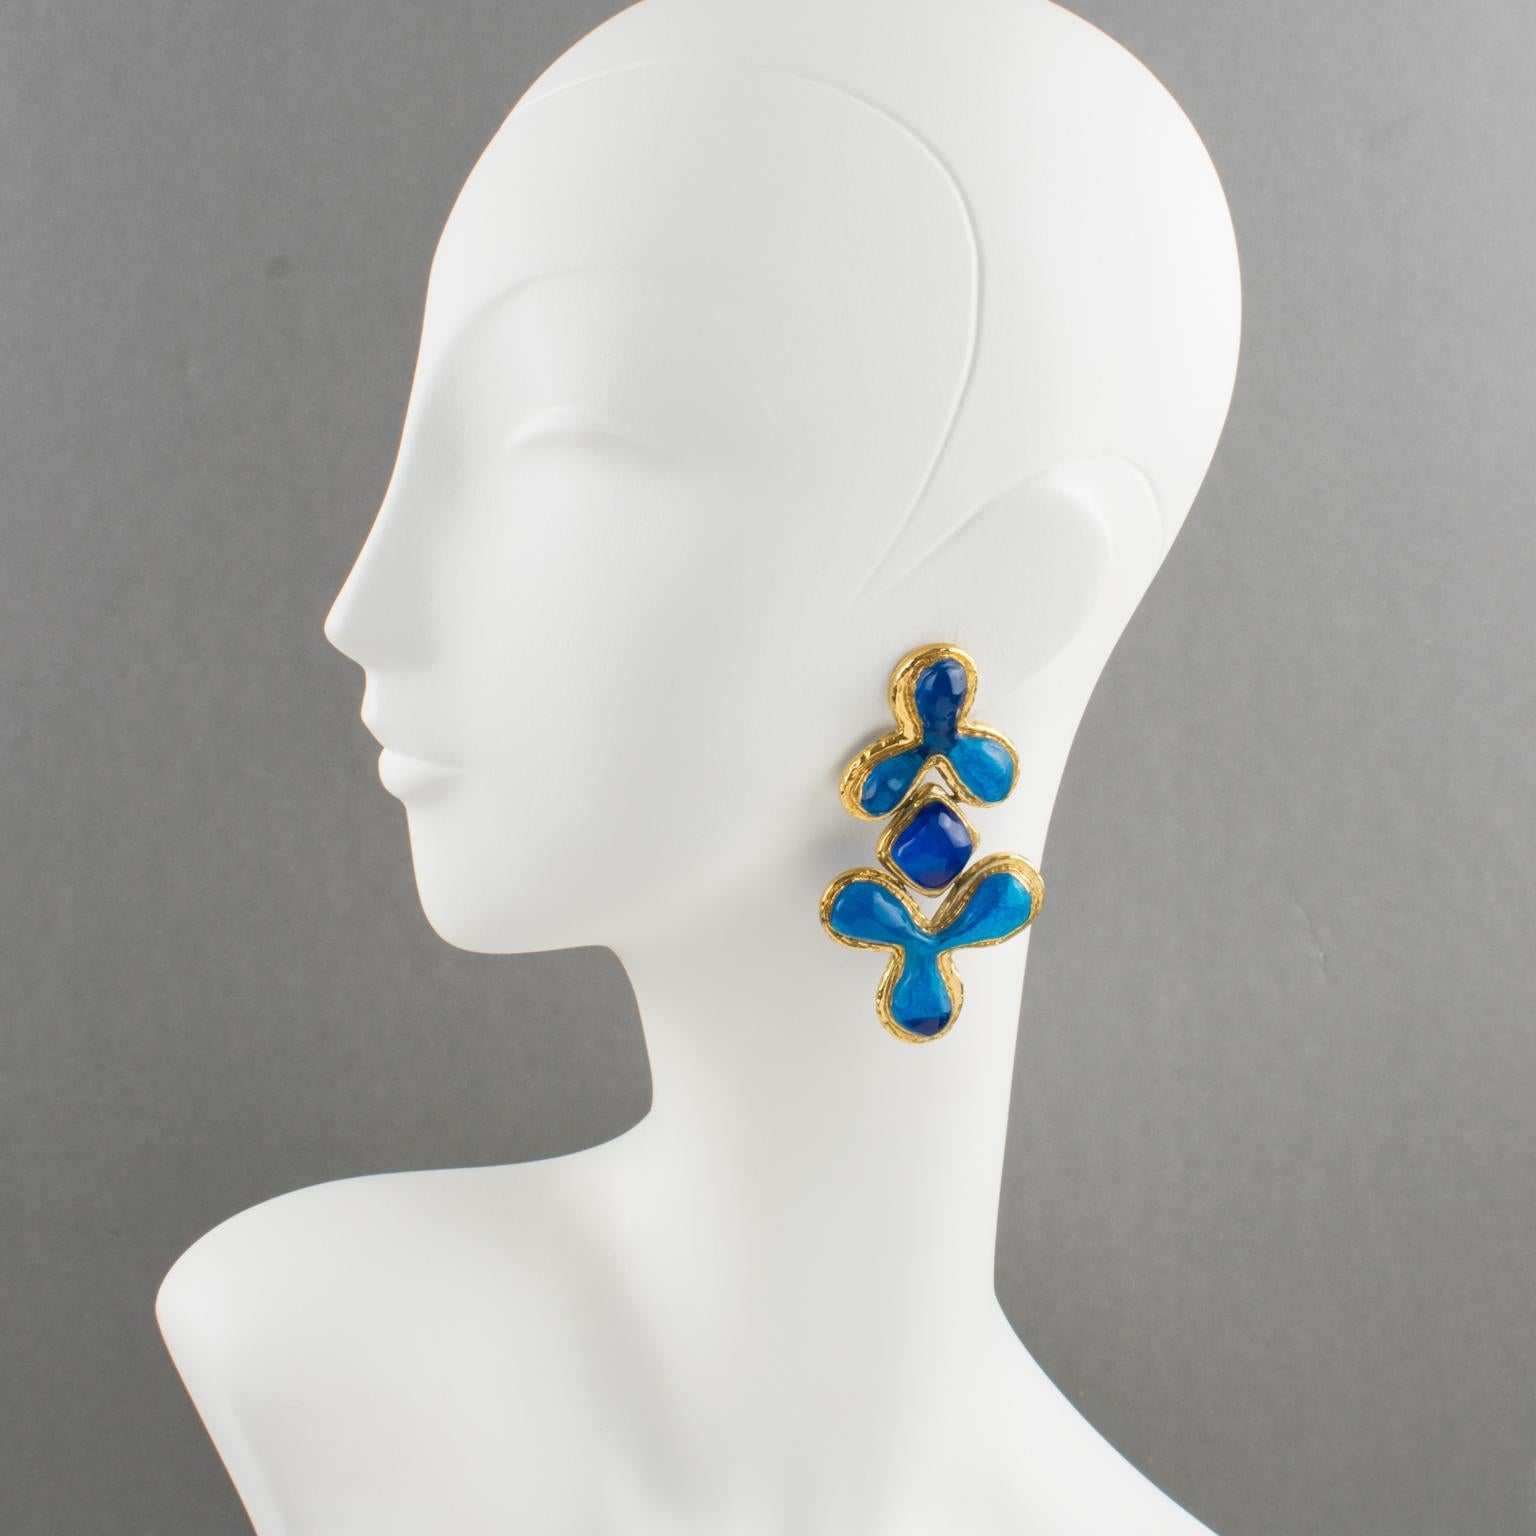 Elegant Guy Laroche Paris clip-on earrings. Dangling shape with carved and textured gilt metal framing, ornate with cobalt blue resin carved cabochons. Engraved signature at the back: 